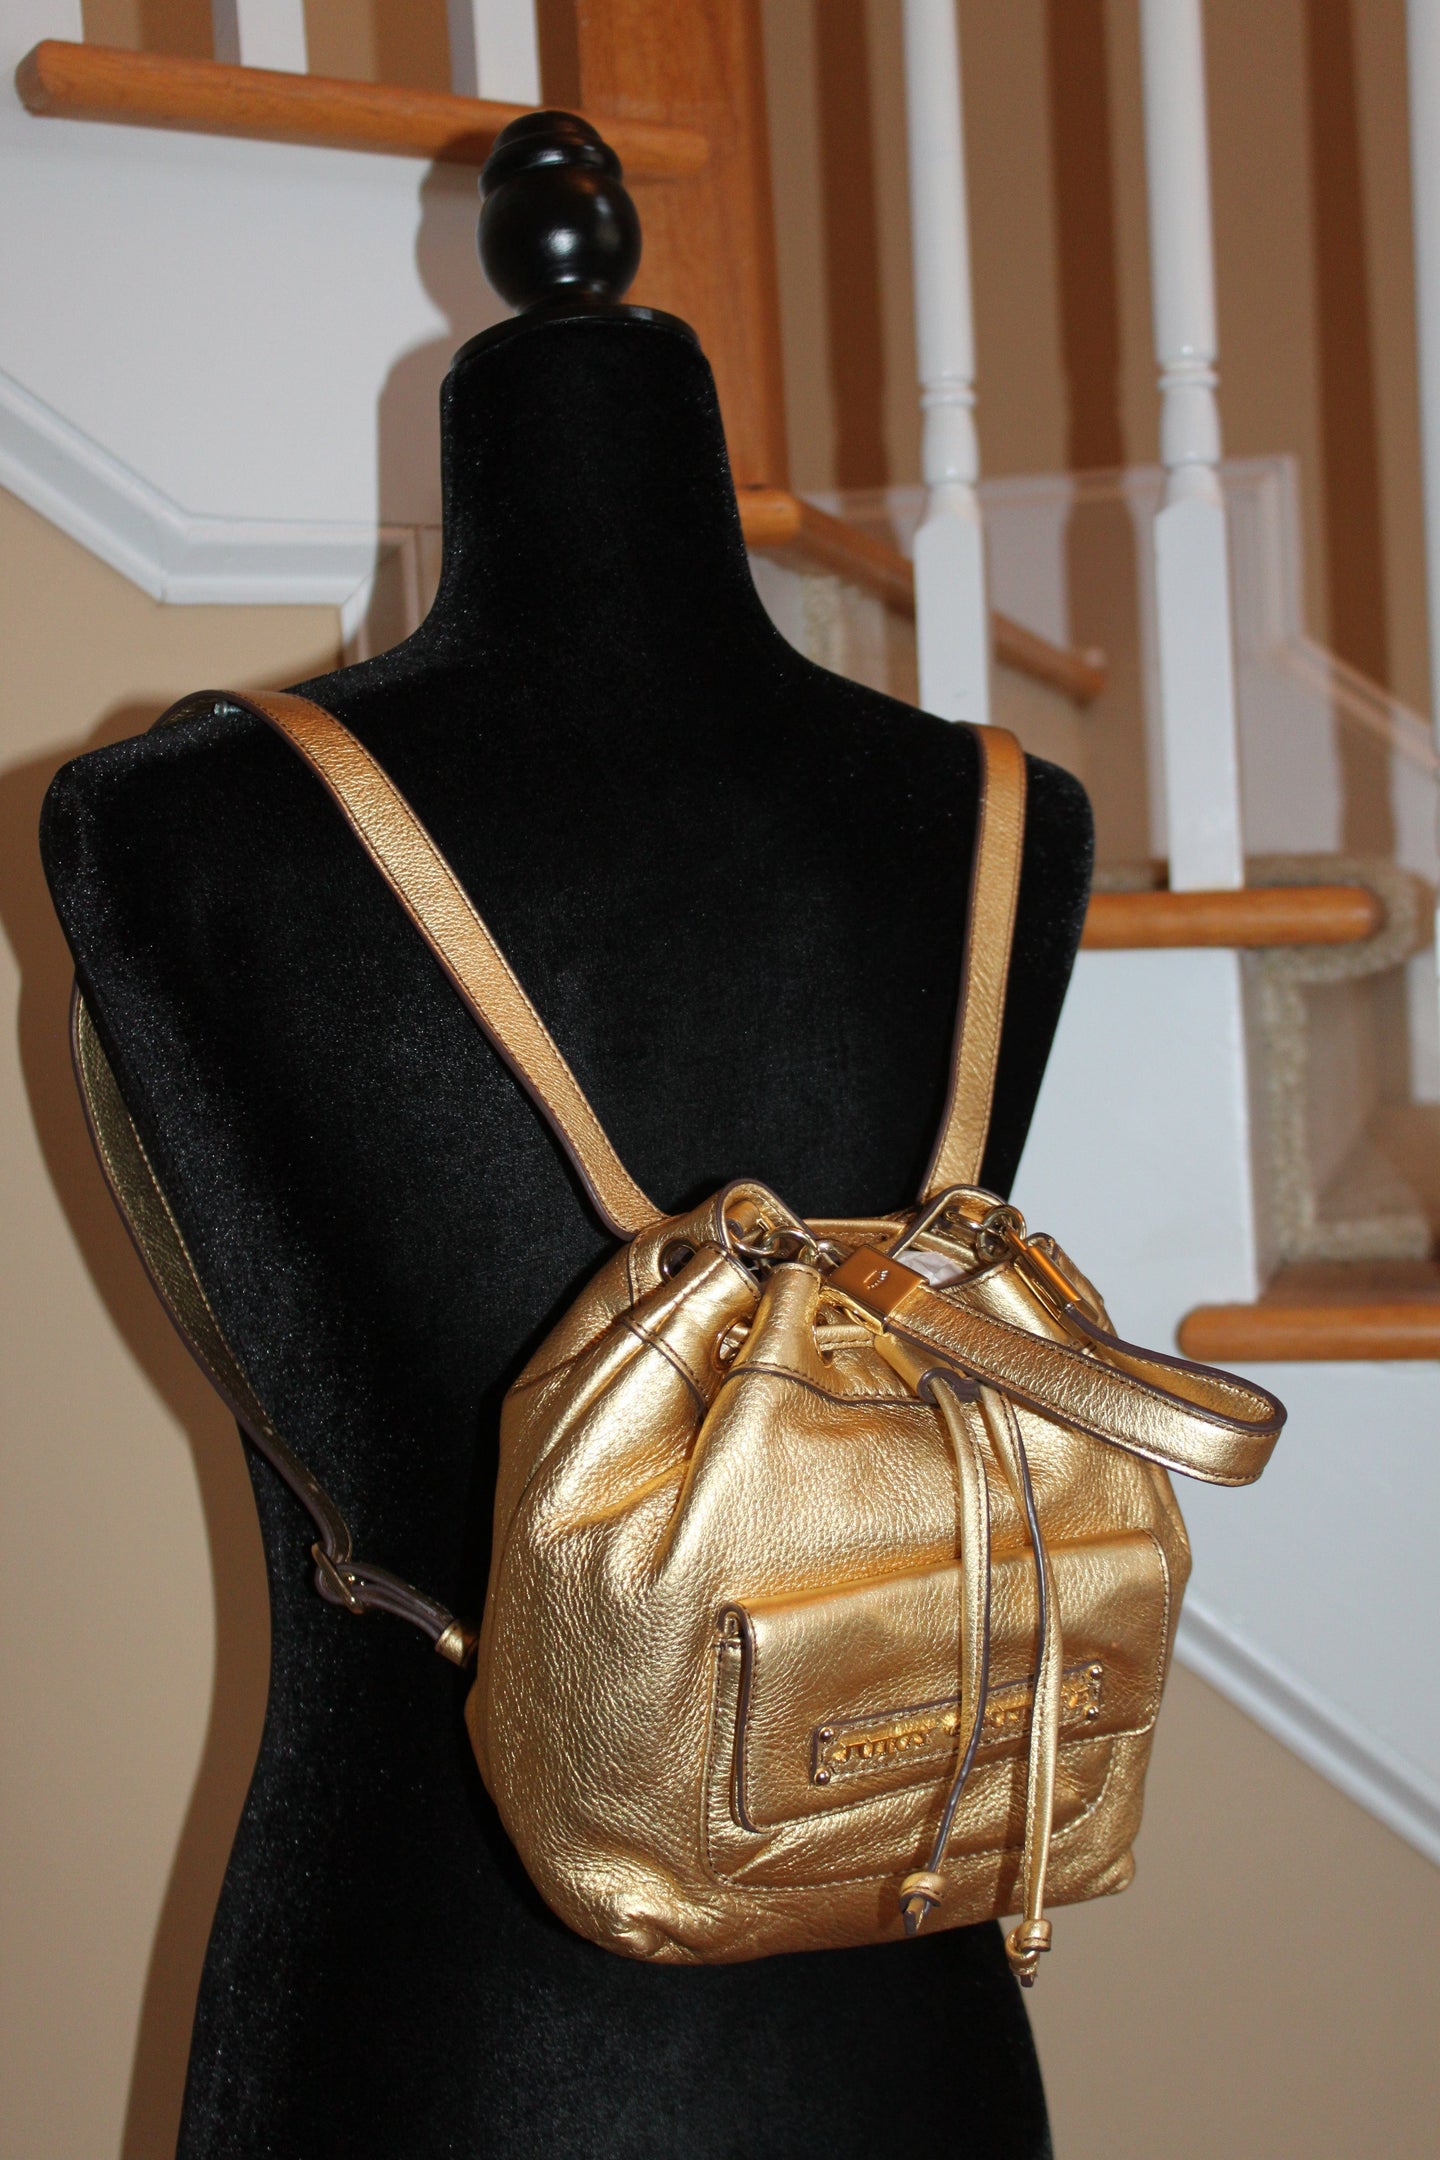 Handbags - Juicy Couture Mini Backpack - Gold with accents HB046